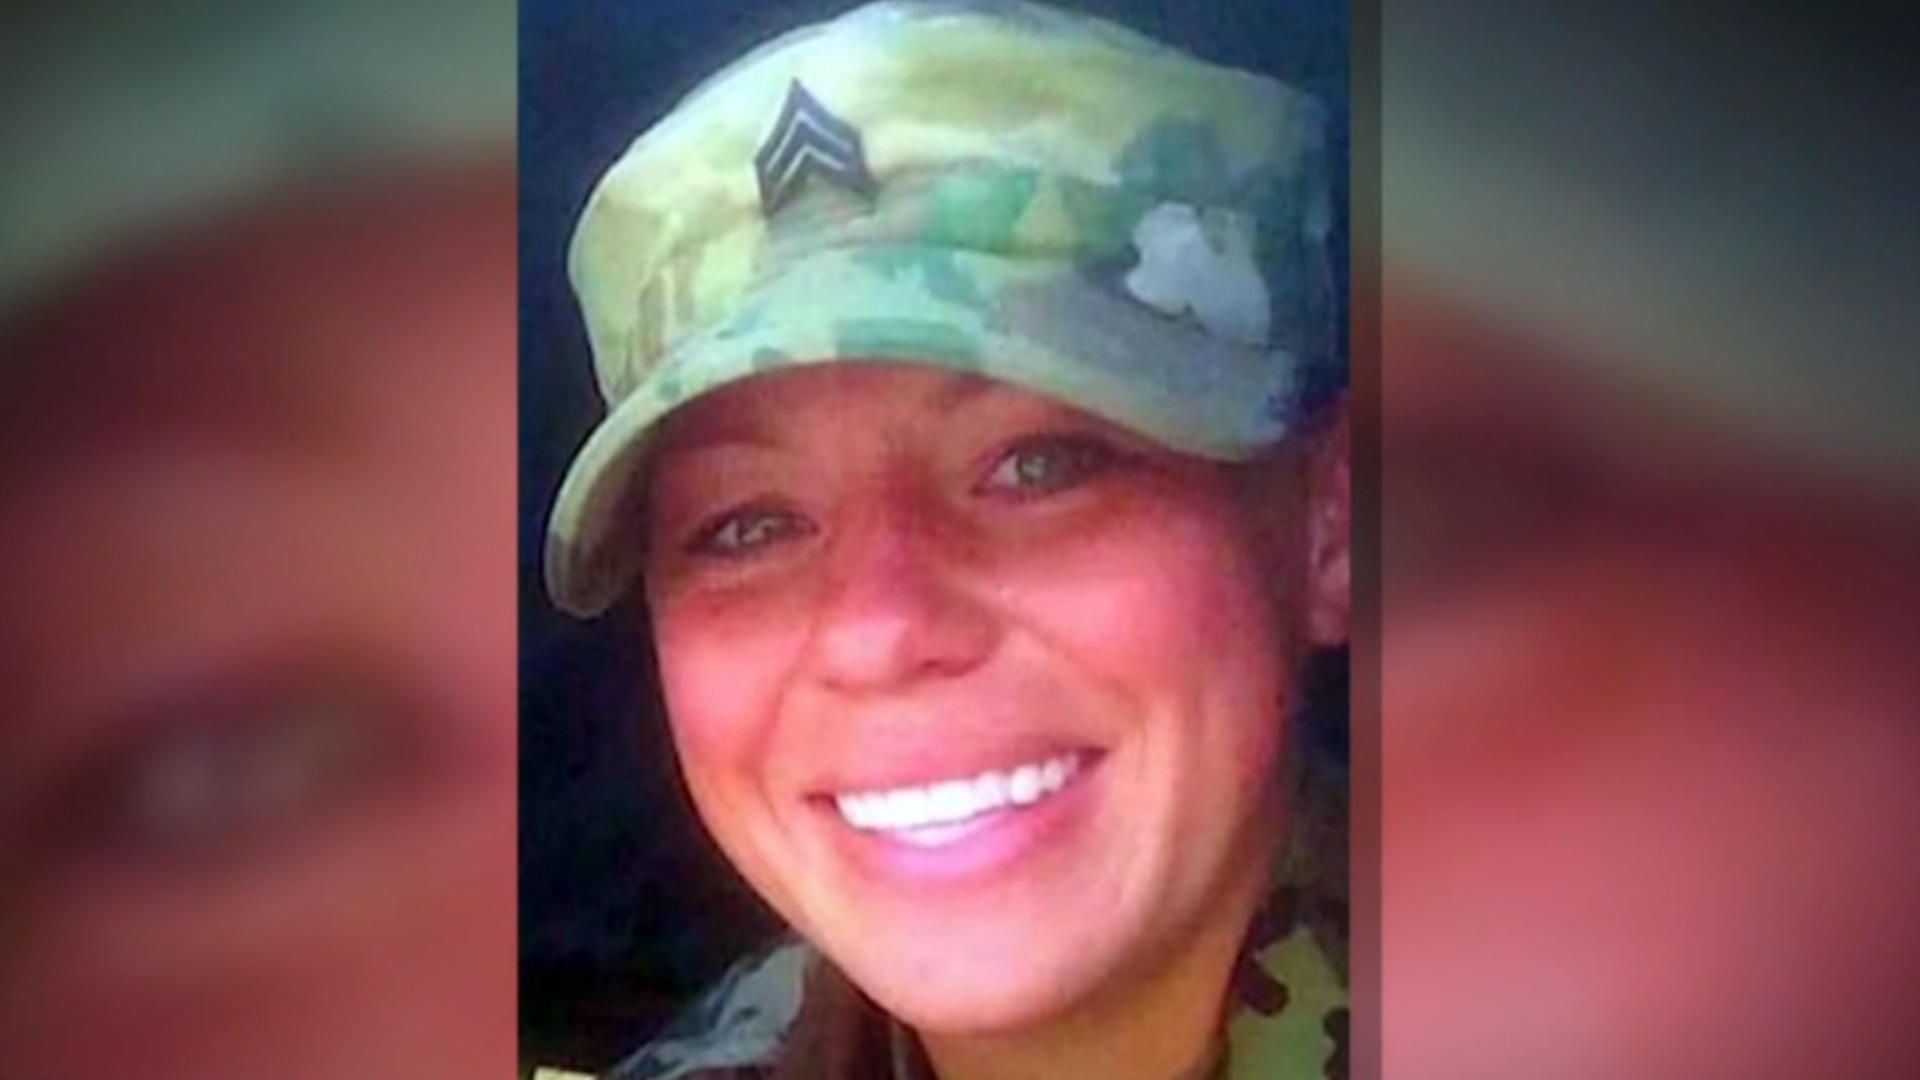 Army did "nothing" for soldier who reported sexual assault, mom says 